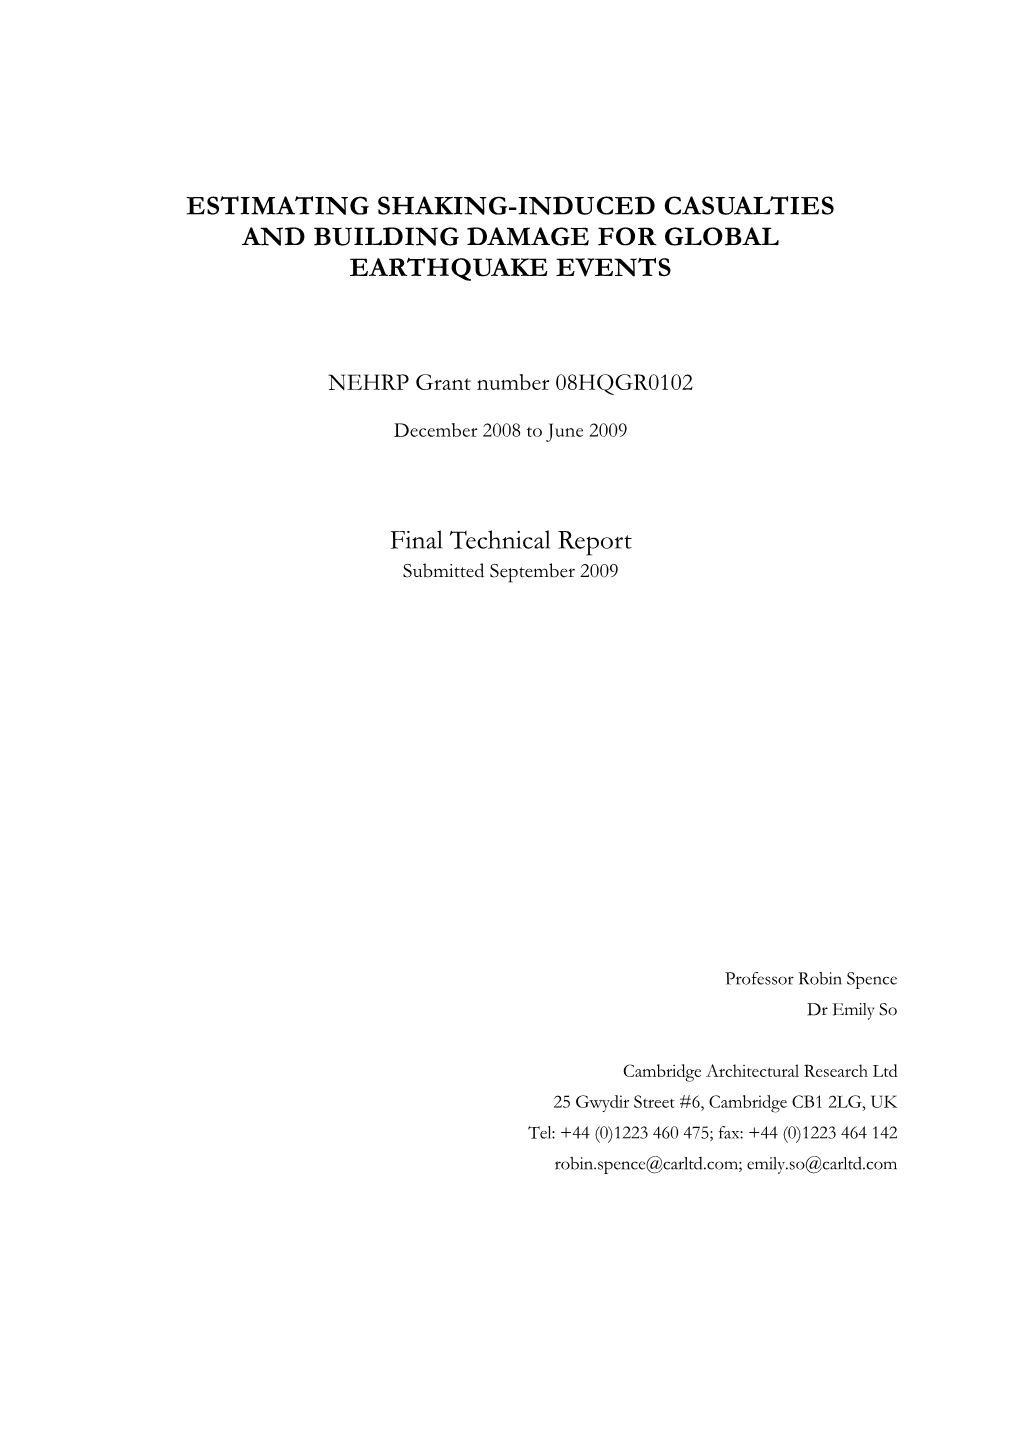 Estimating Shaking-Induced Casualties and Building Damage for Global Earthquake Events